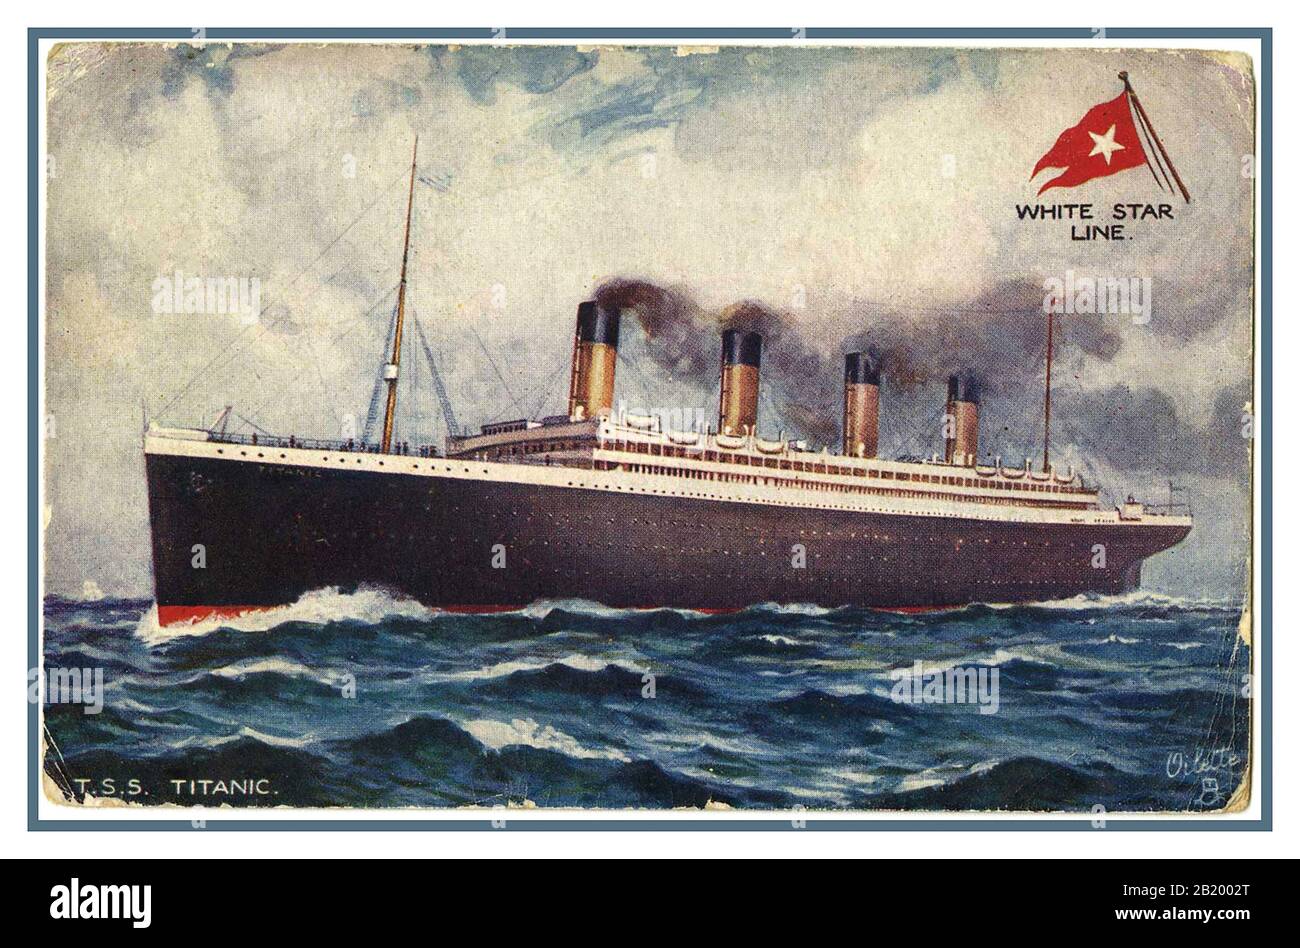 TITANIC 1912 ILLUSTRATION Vintage 1912 Titanic Promotional Colour Postcard From The White Star Line before its tragic sinking Stock Photo